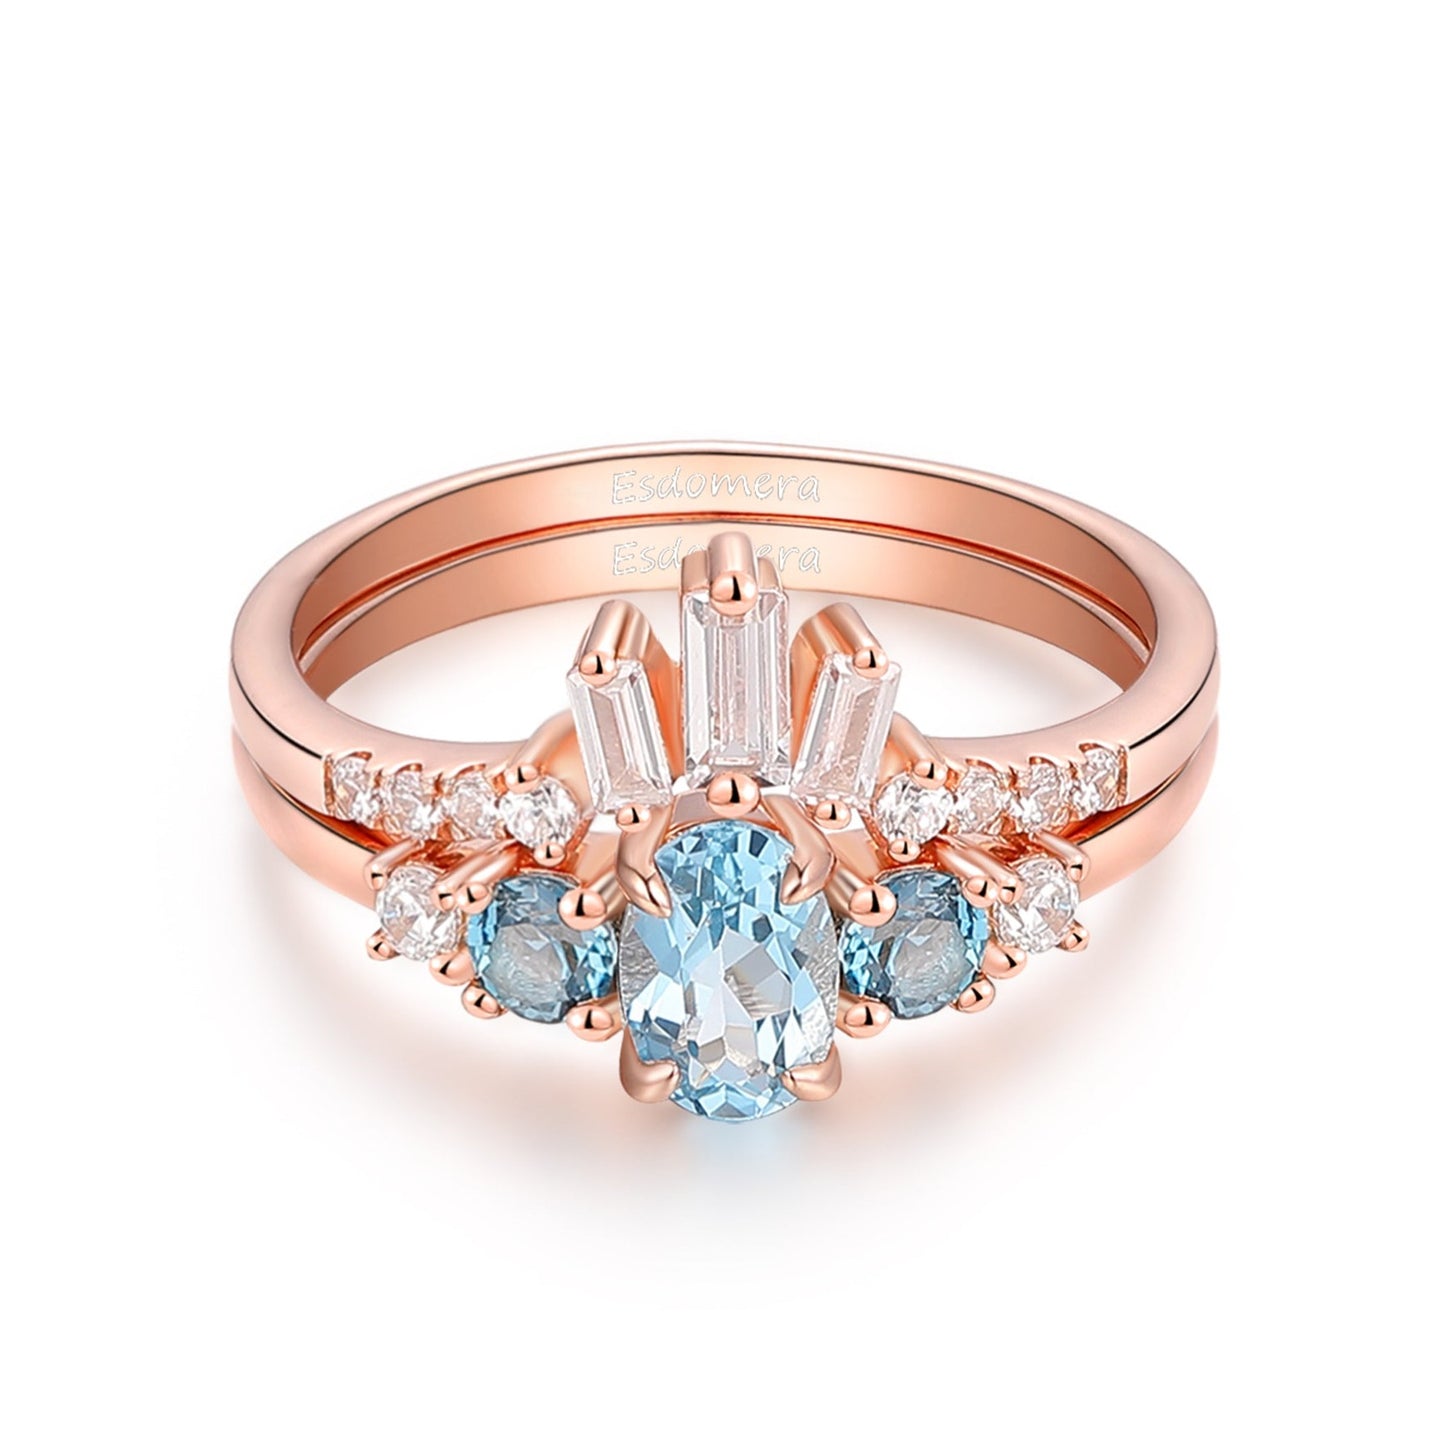 Sky Blue Topaz Wedding Ring Set, Oval Topaz Engagement Ring For Her, Birthday Gifts